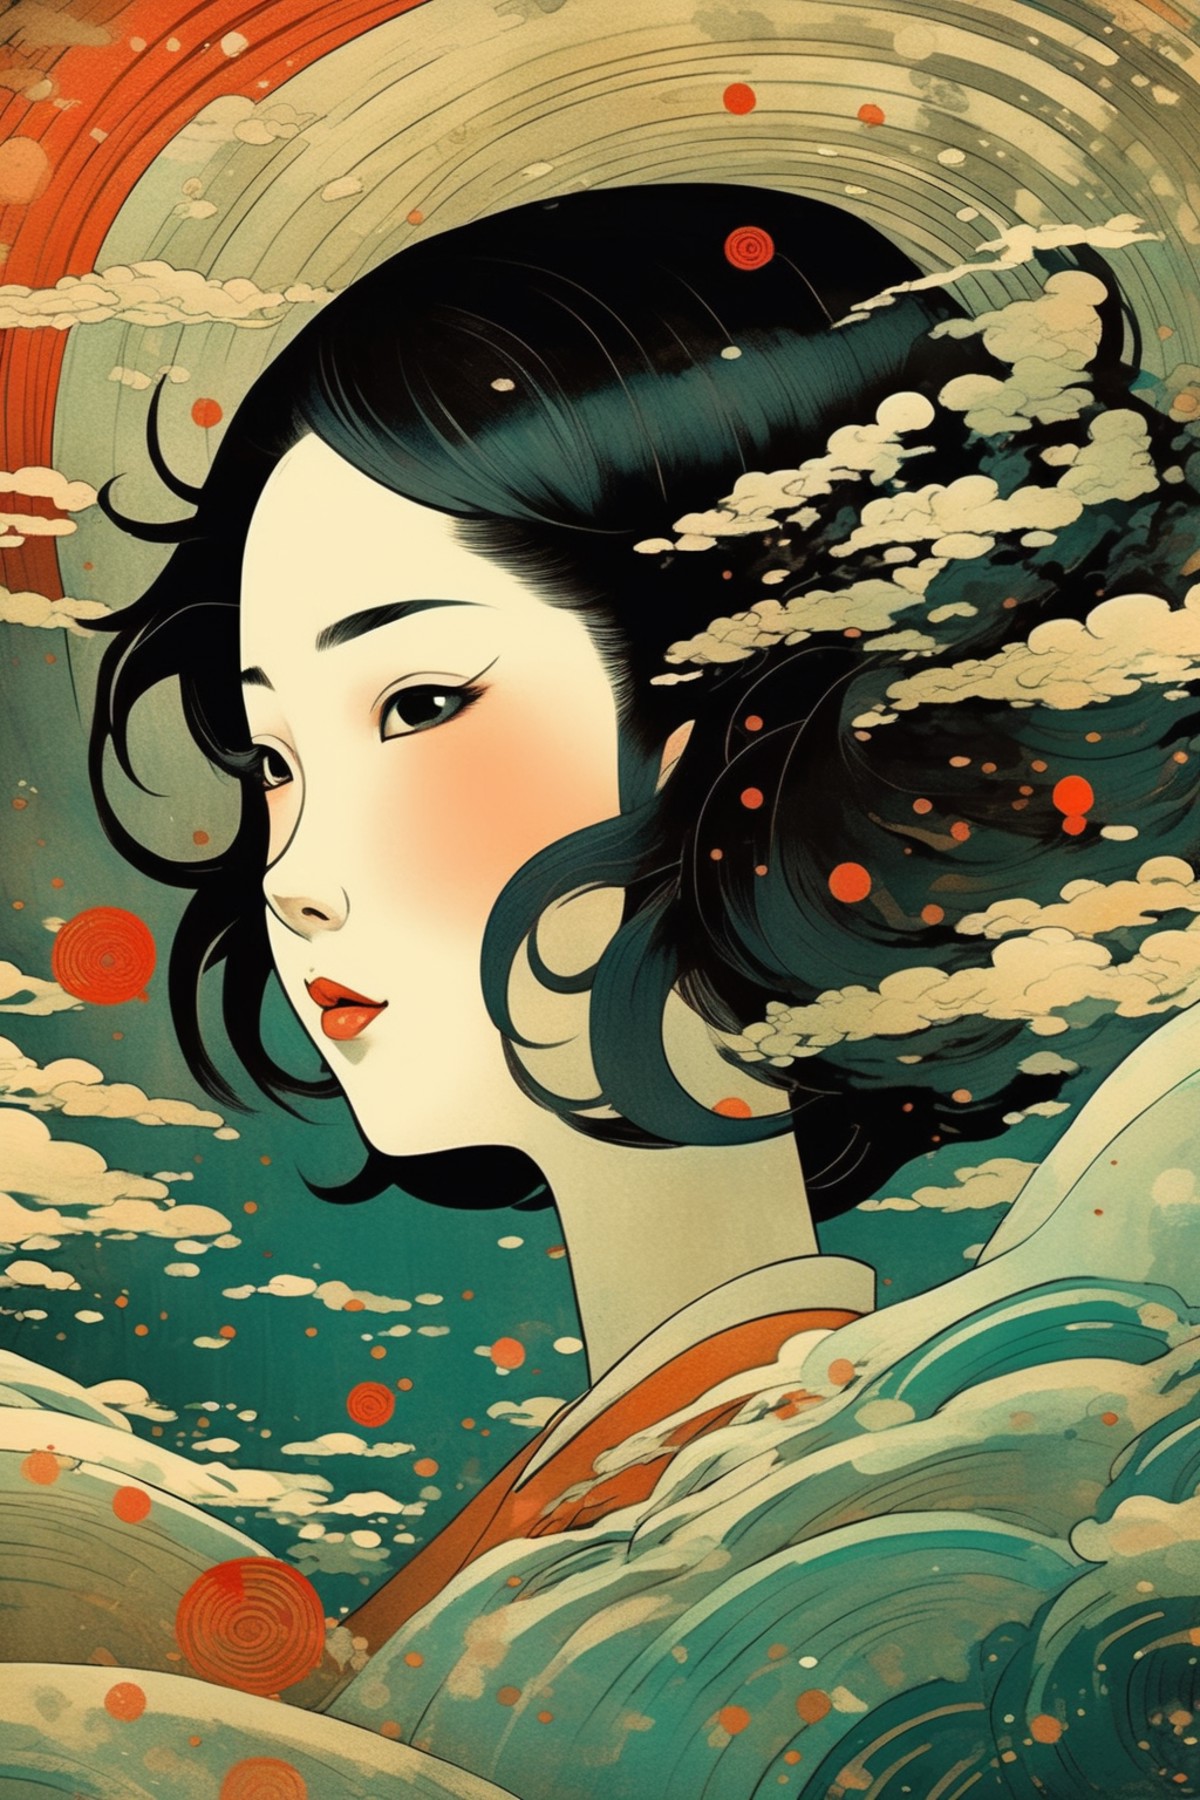 00733-2377836036-_lora_Victo Ngai Style_1_Victo Ngai Style - minimalist abstract Japanese art illustration that play with colour and dark shadows.png